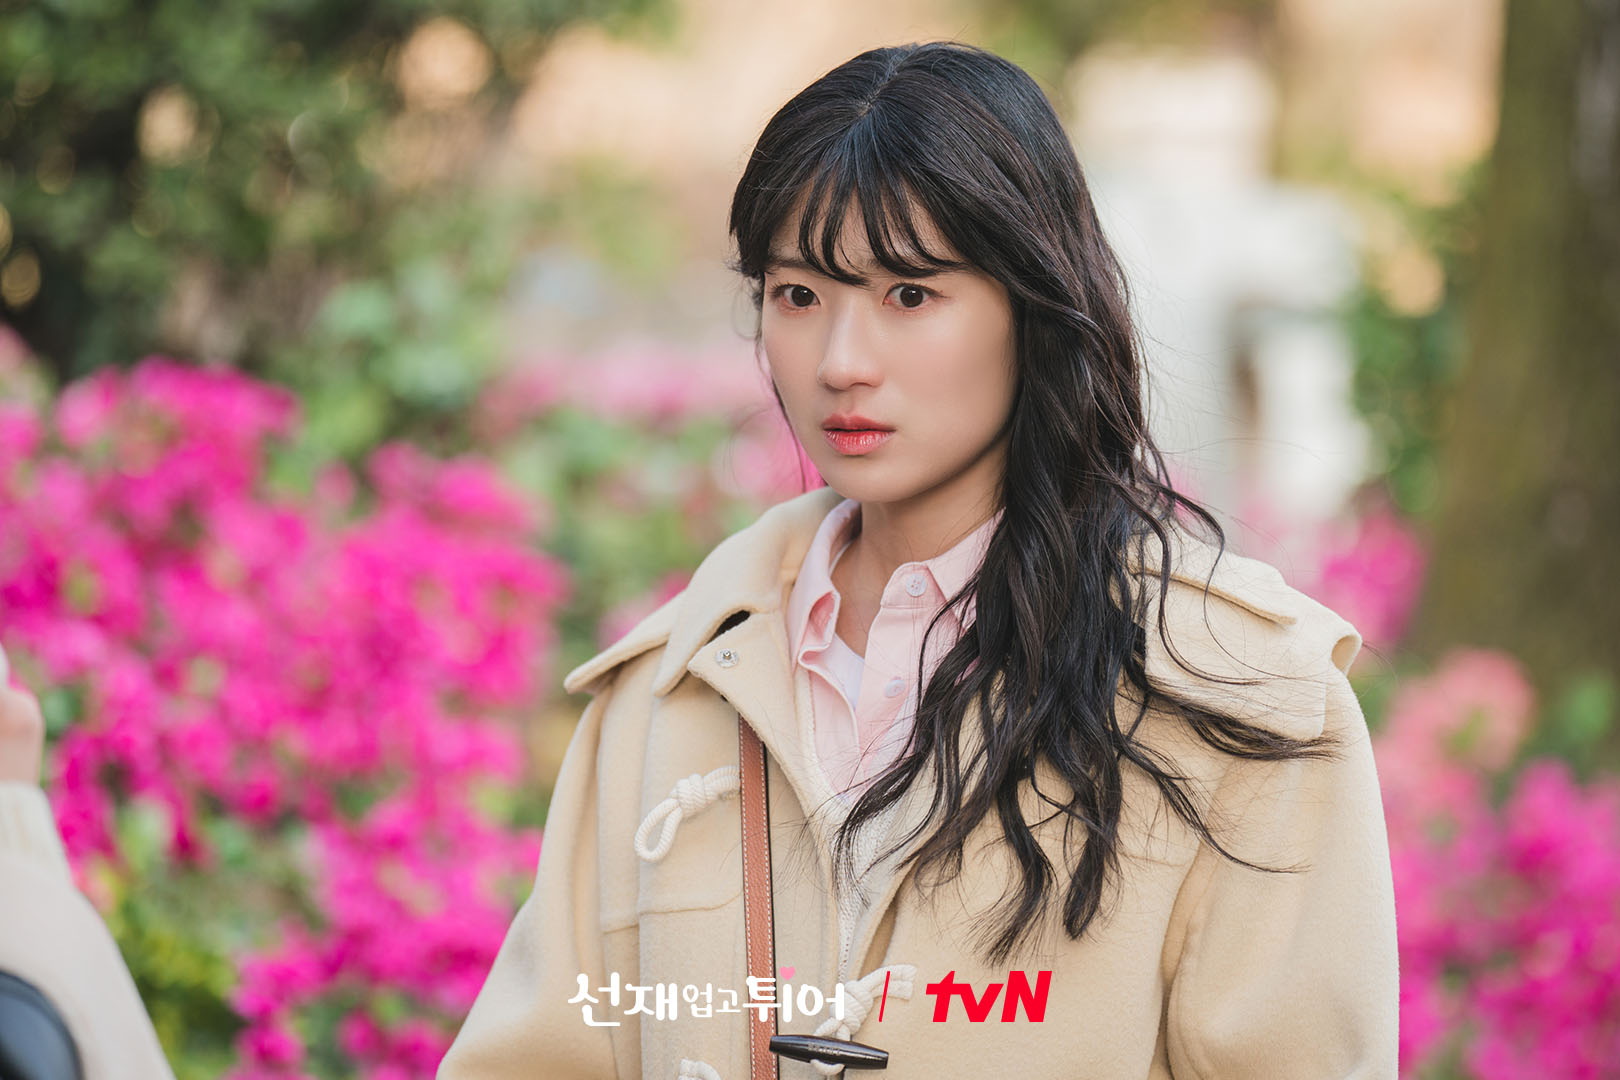 Kim Hye Yoon Takes Her Final Trip To The Past To Save Byeon Woo Seok In 